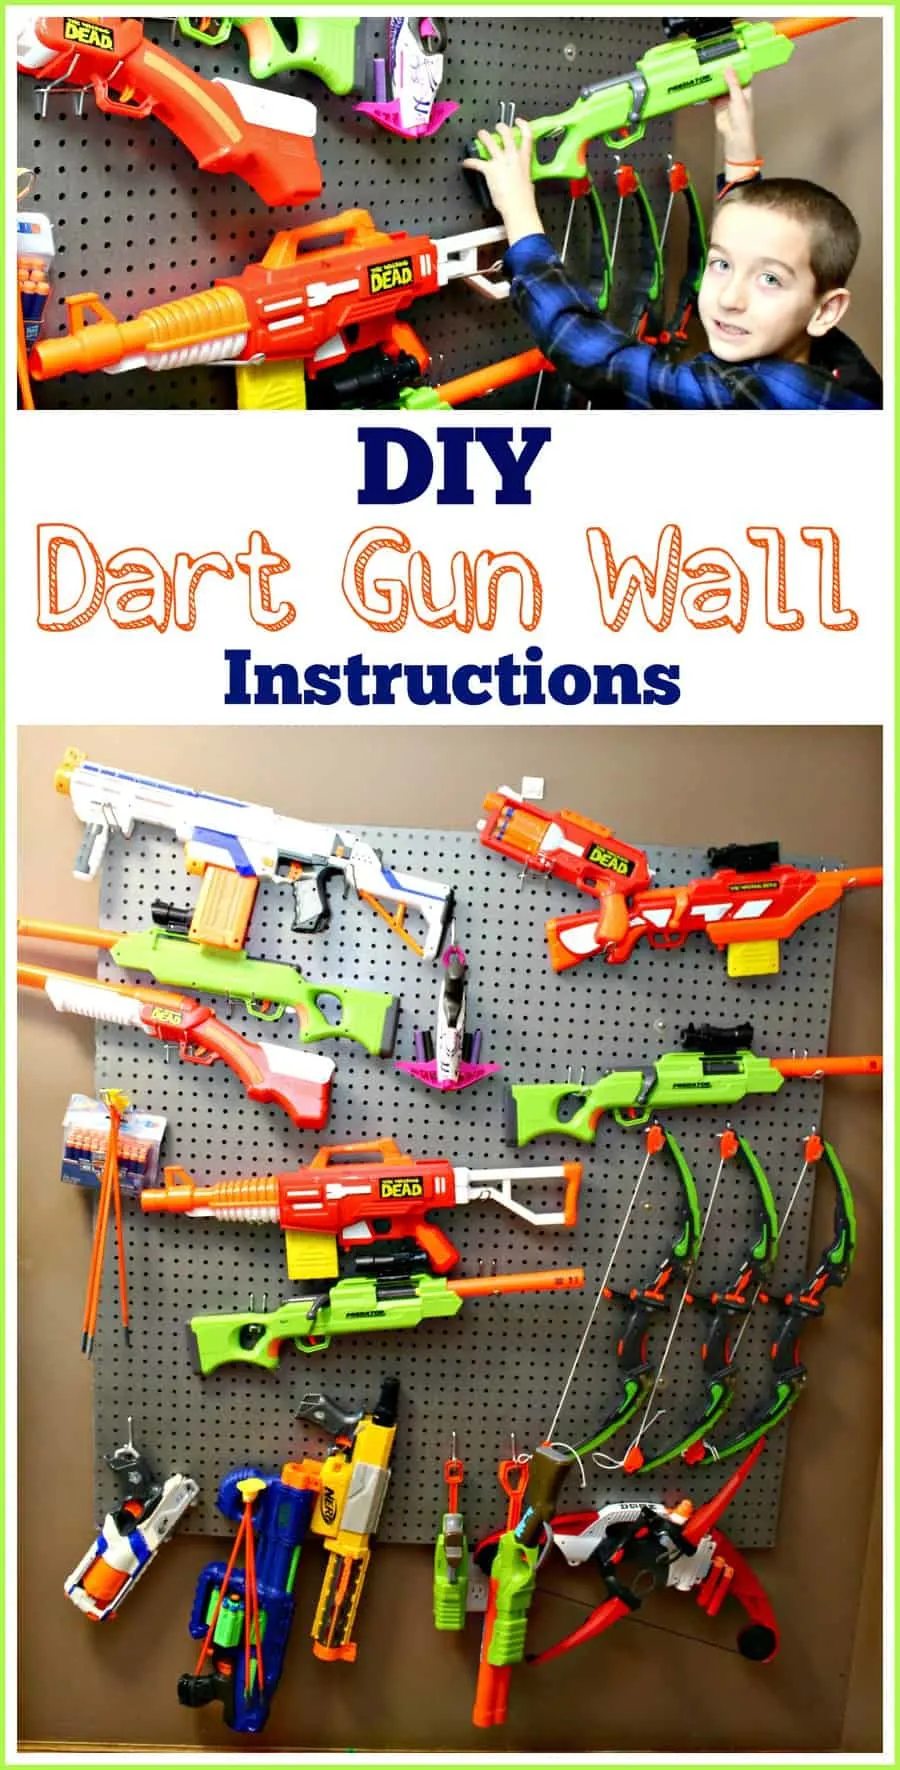 Sociale Studier flaskehals Havn How To Build A Nerf Gun Wall {With Easy to Follow Instructions!}